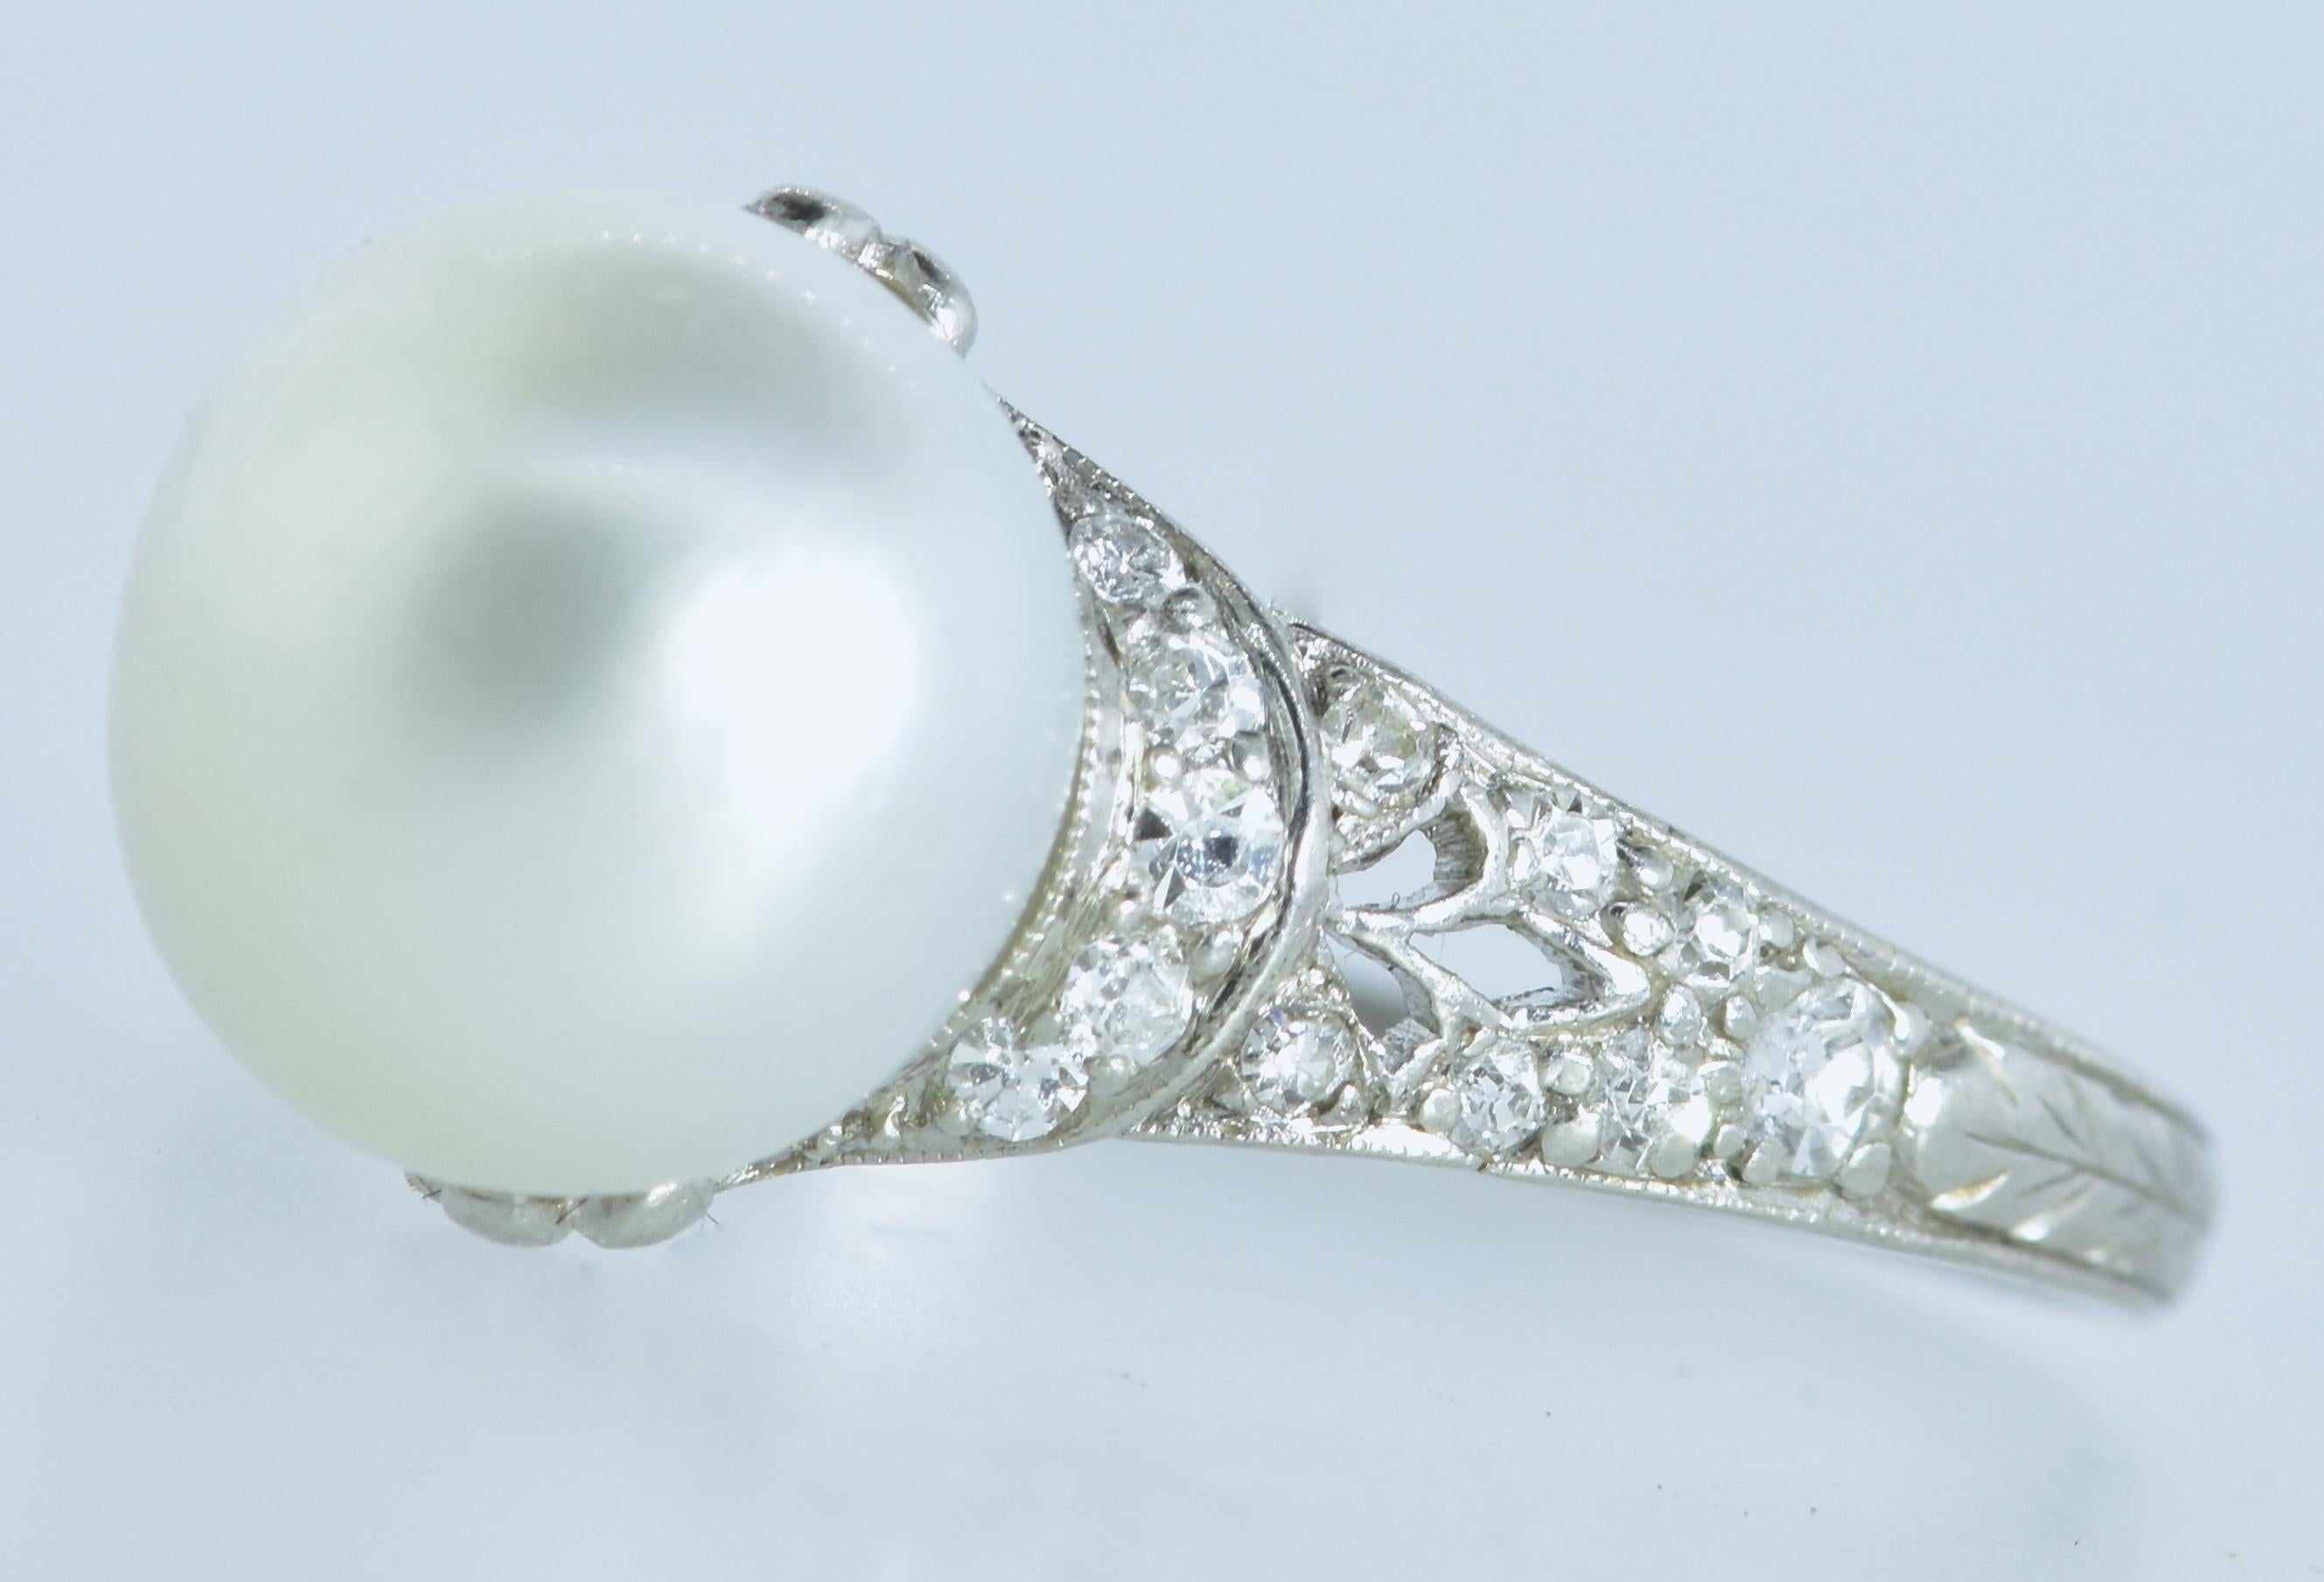 Edwardian Antique Diamond Ring Centering a Natural Pearl GIA Certified, circa 1910